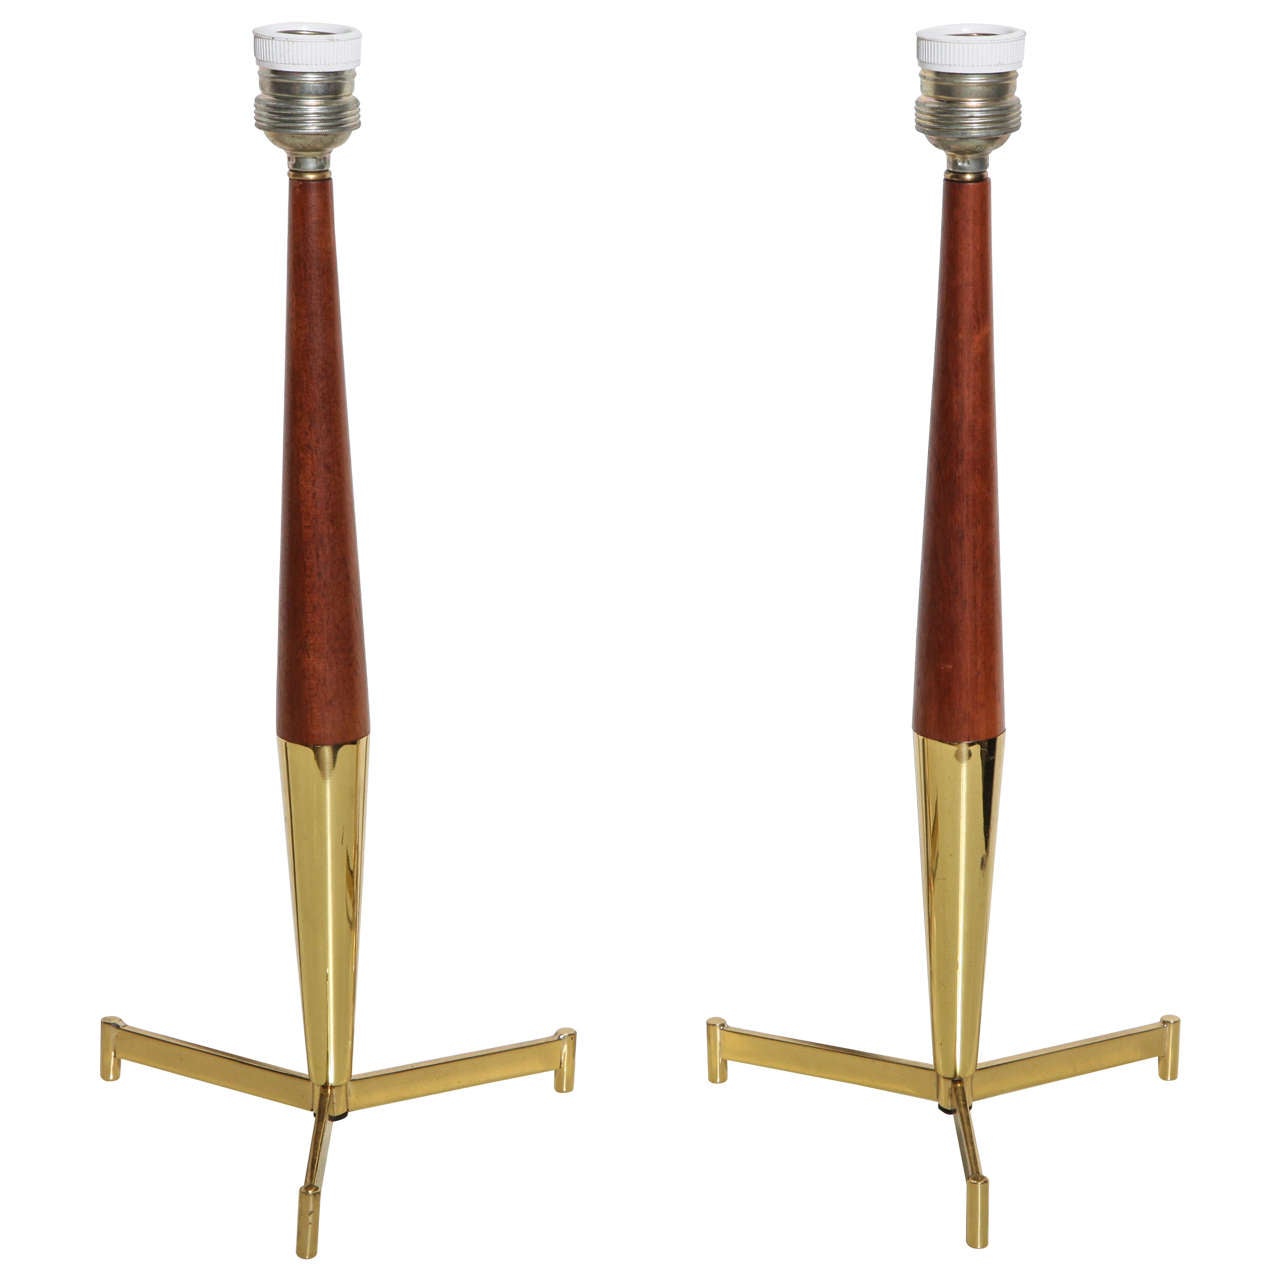 Pair of French Modern Brass and Teak Tripod Candlestick Table Lamps